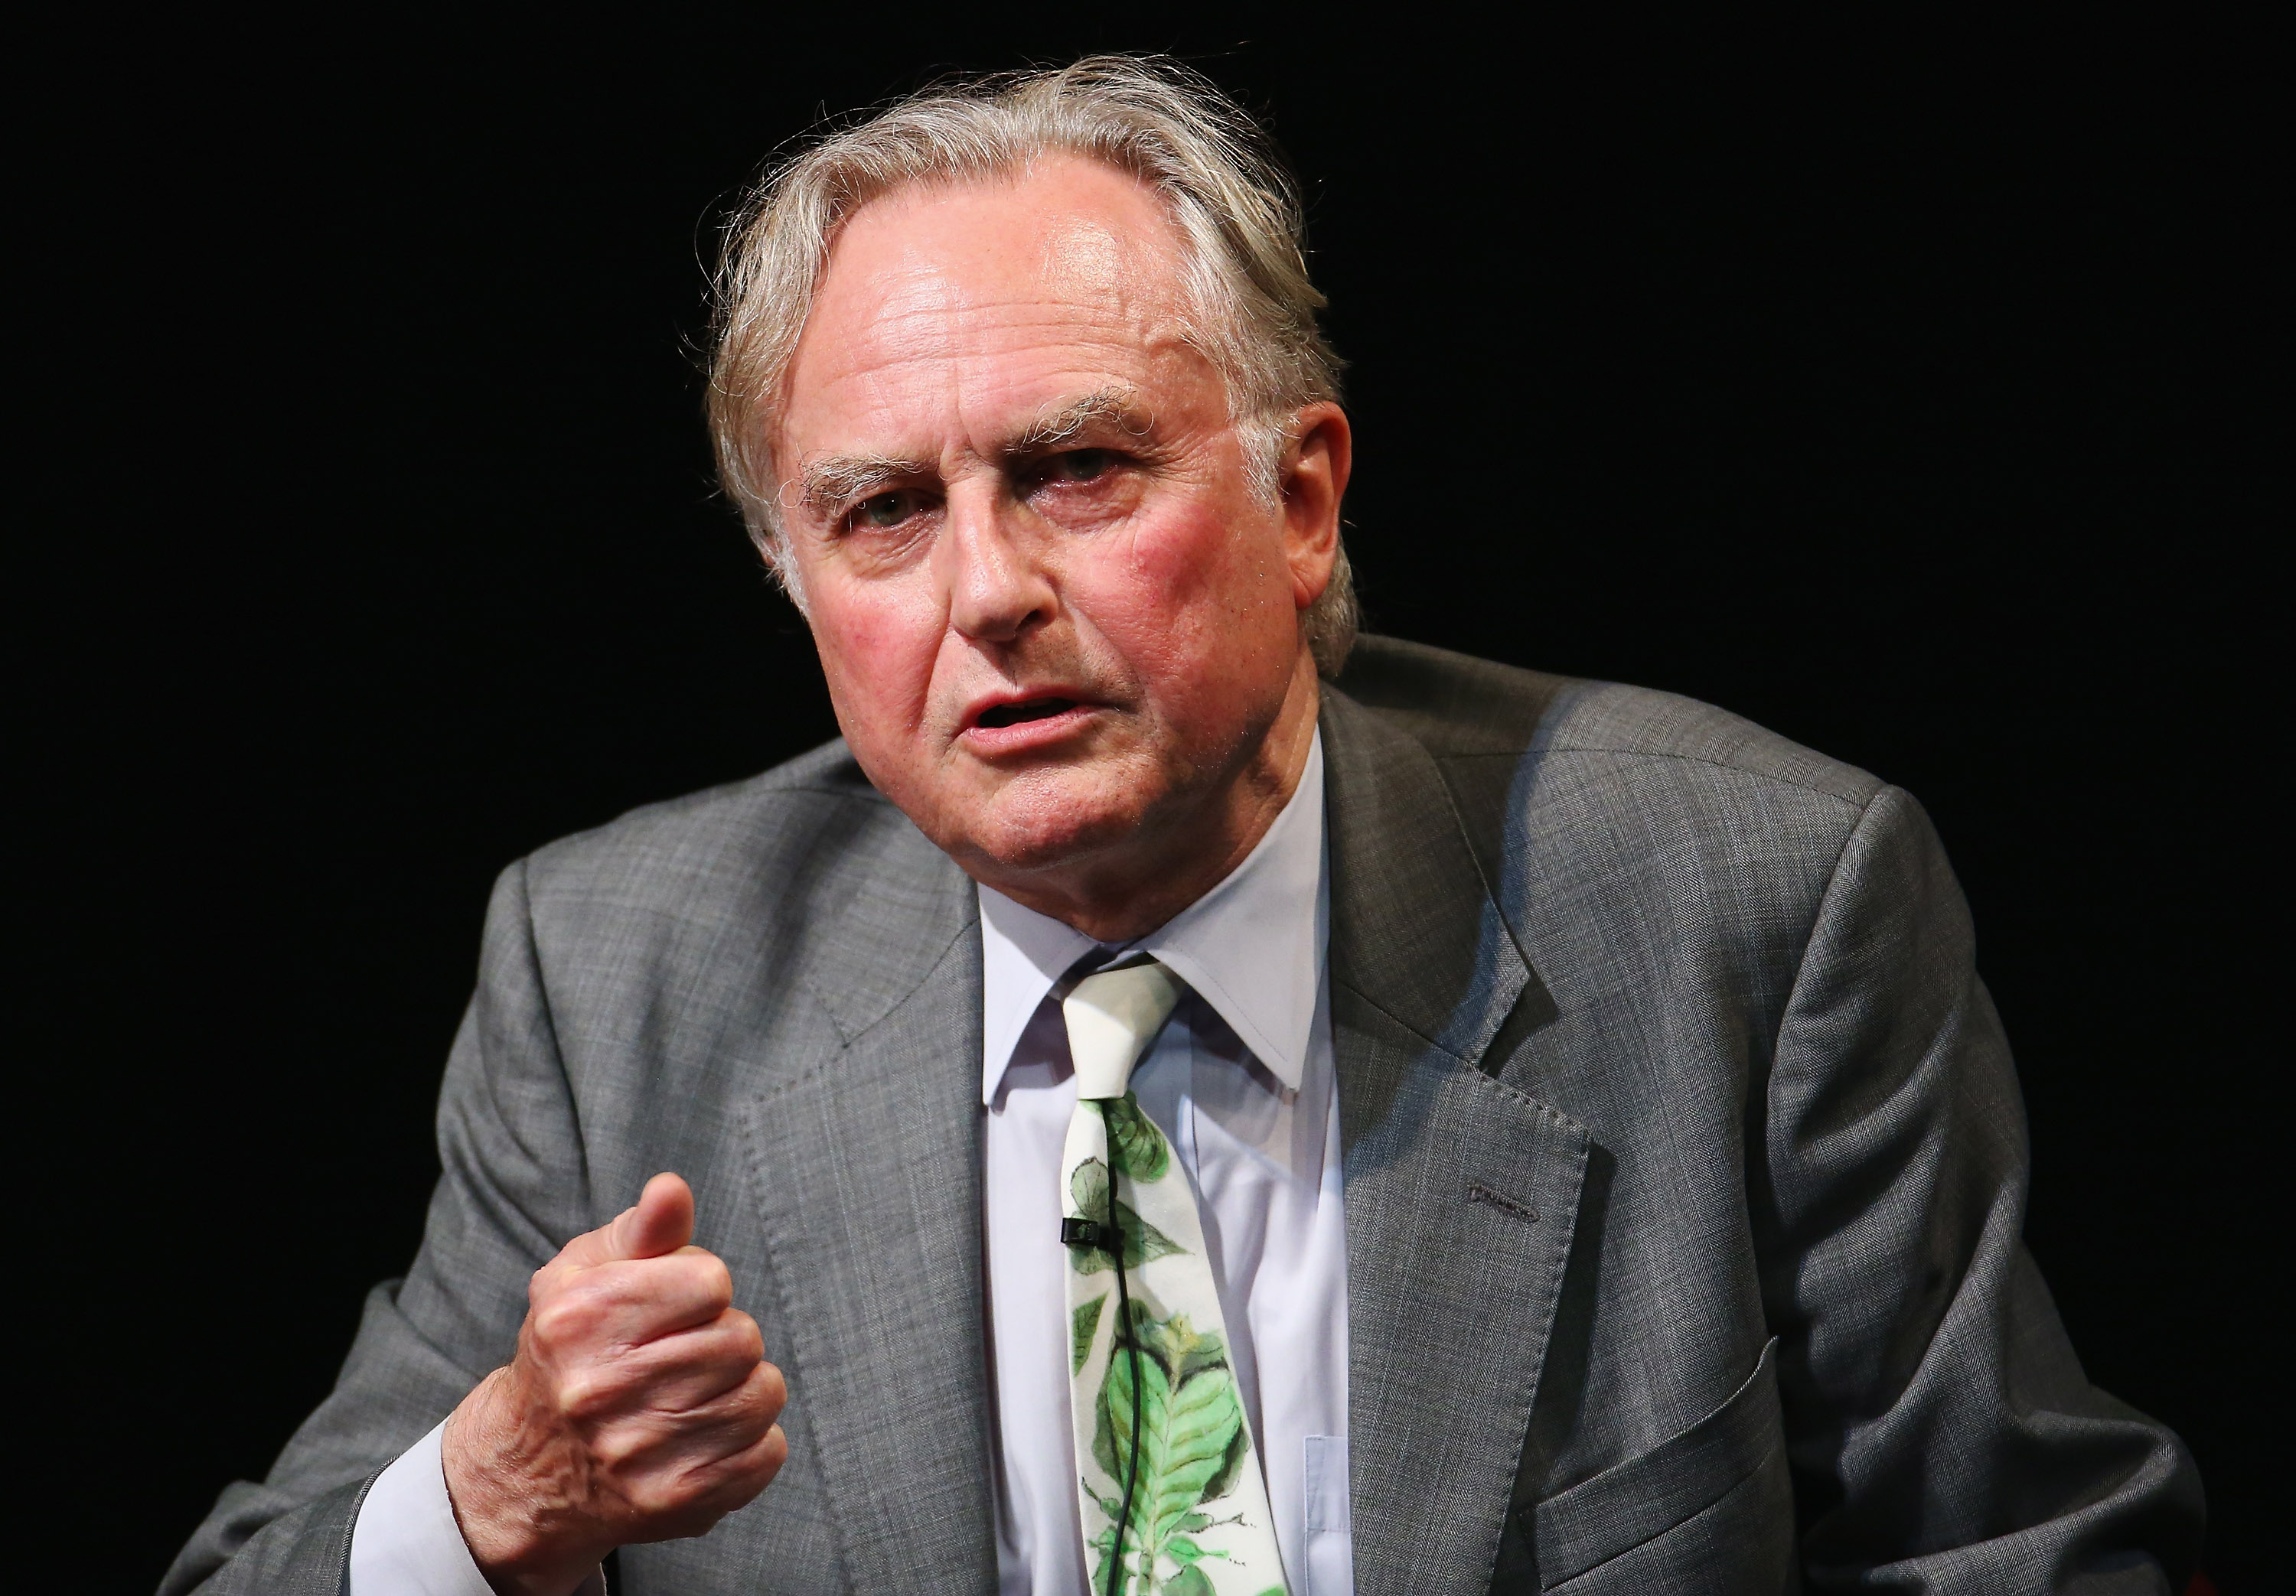 Richard Dawkins, founder of the Richard Dawkins Foundation for Reason and Science, promotes his new book at the Seymour Centre on December 4, 2014 in Sydney, Australia. (Don Arnold—Getty Images)